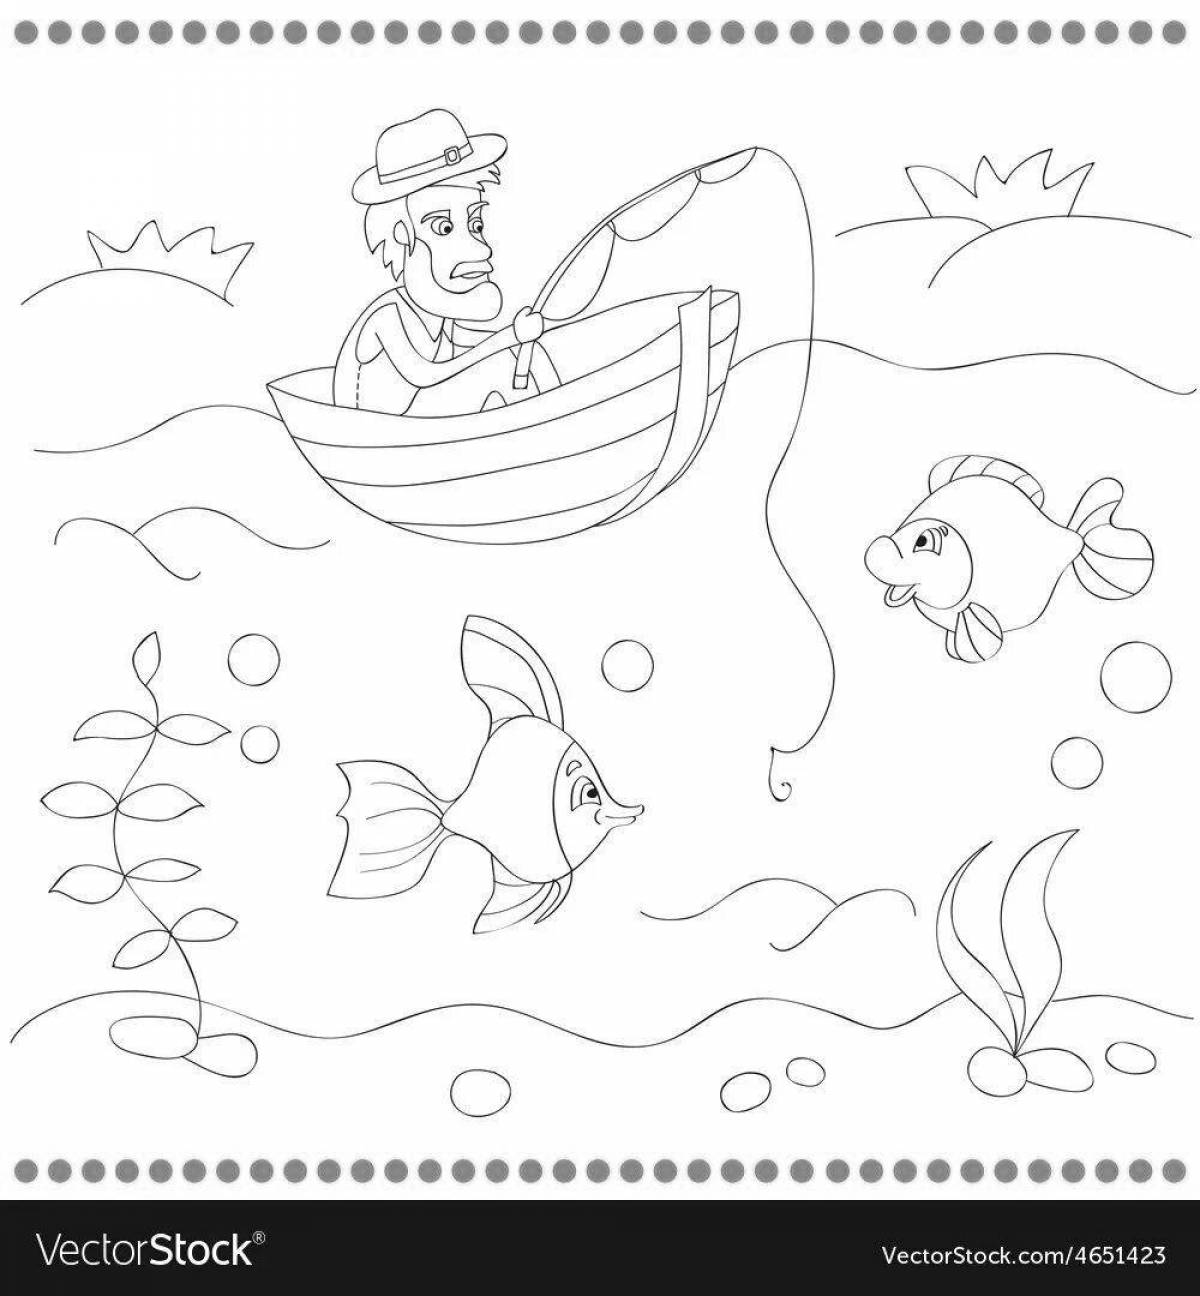 Awesome fish and fish coloring pages for kids